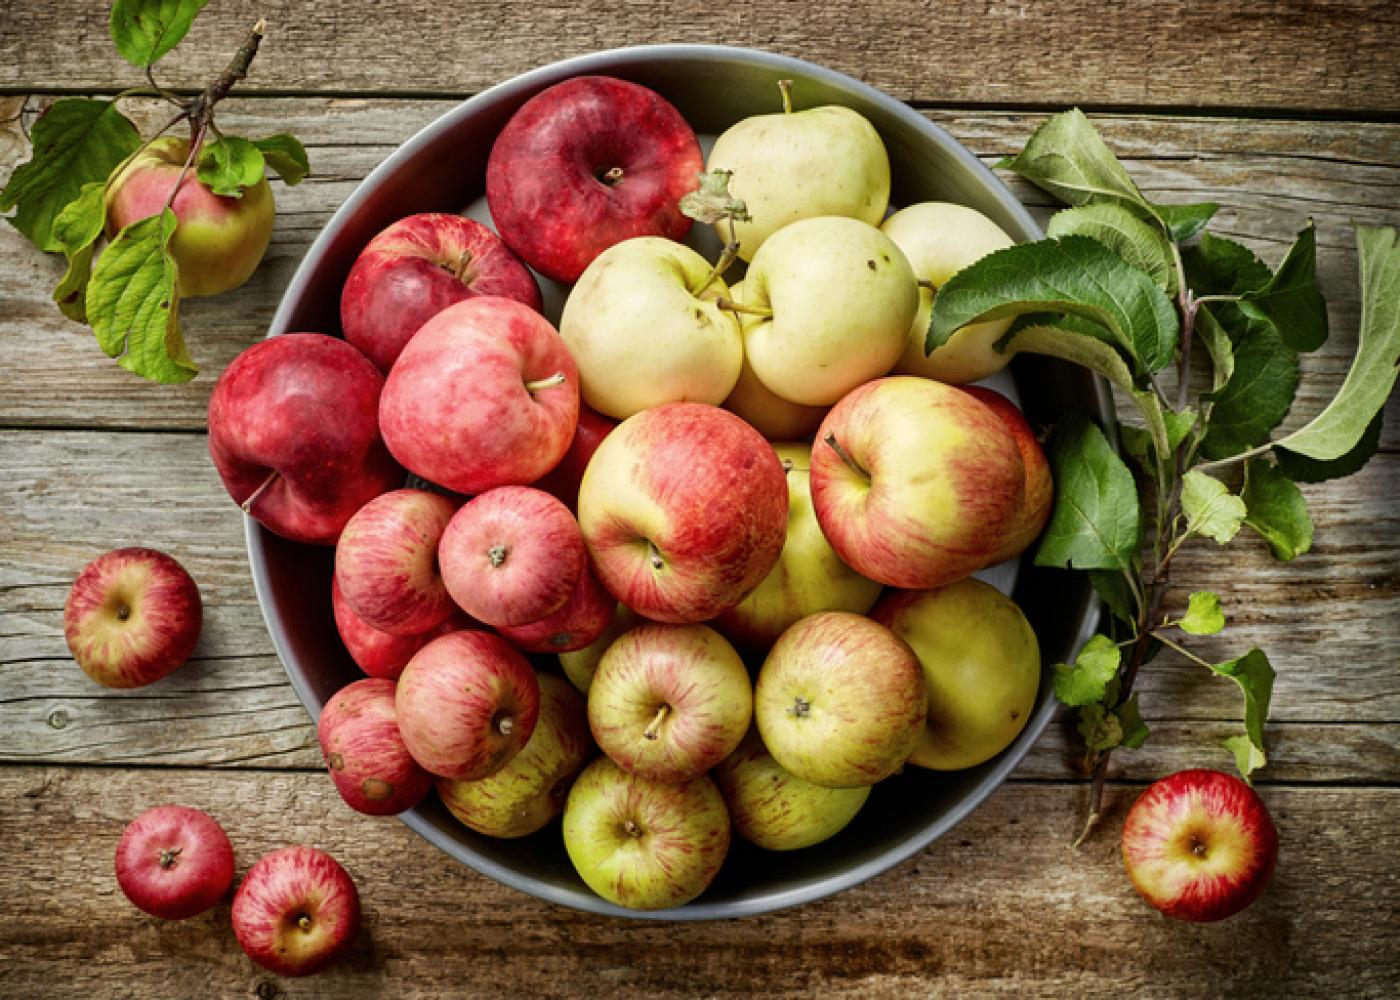 What else you need to know about apples